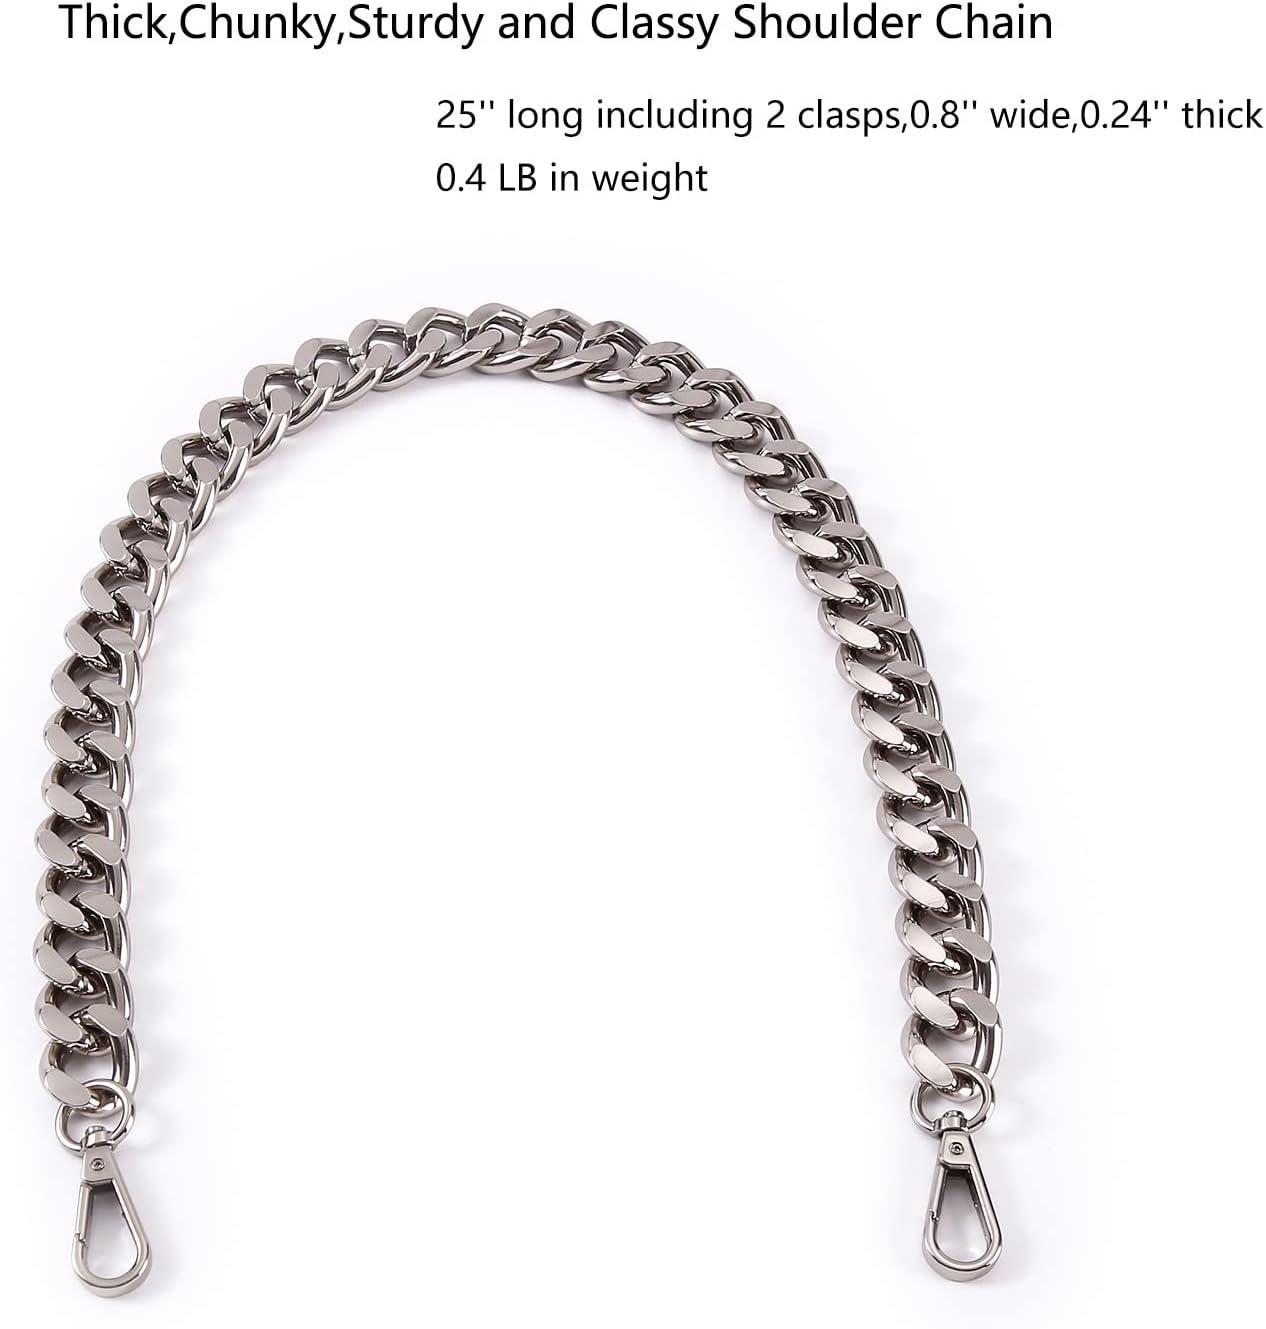 25 Inch Trendy Chunky Metal Chain Purse Handles Shoulder Strap